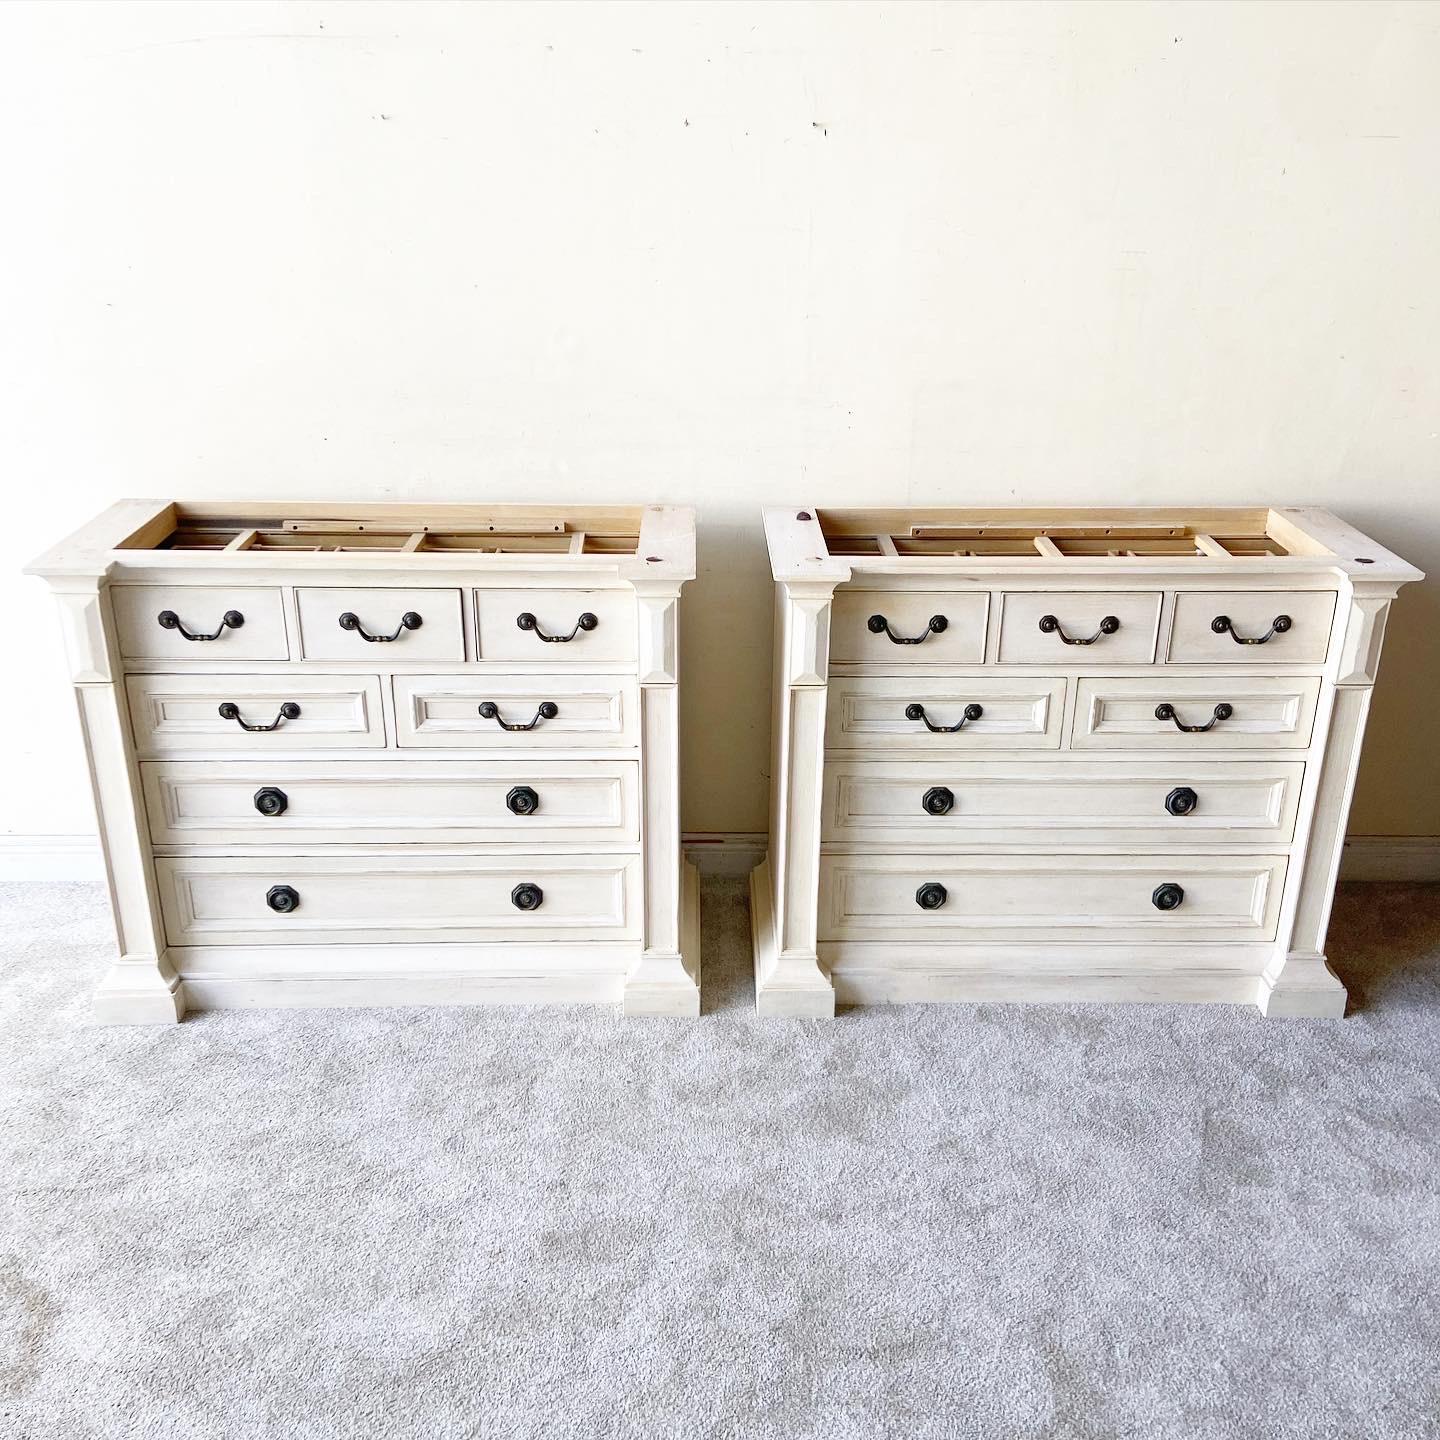 Exceptional pair or commodes/small dressers by Henredon. Each feature 7 spacious drawers with Italian travertine tops.
 